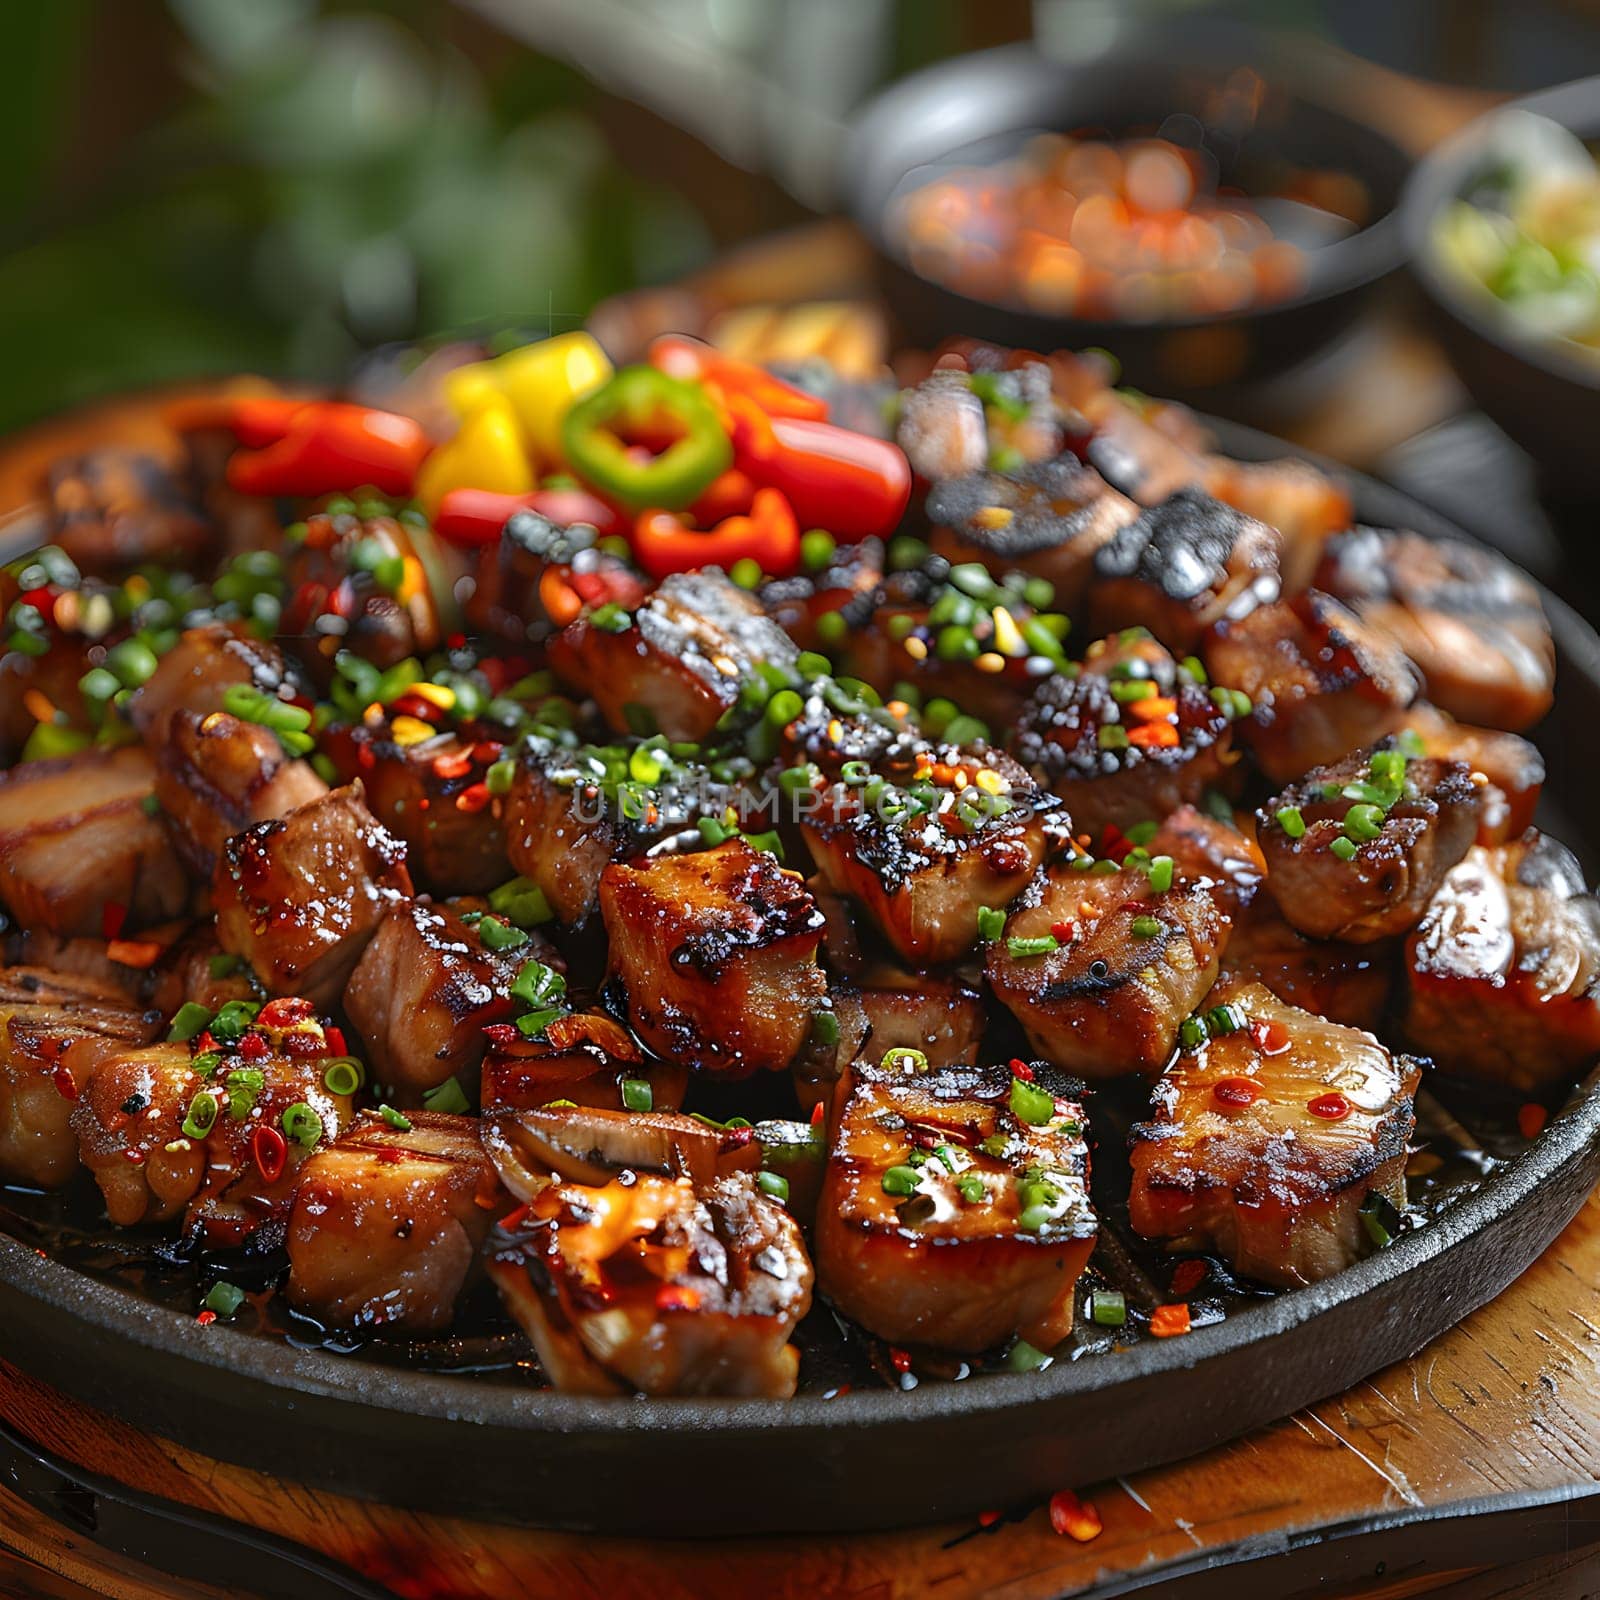 A delicious plate of finger food featuring grilled meat and peppers on a rustic wooden table, perfect for a flavorful and savory dish in any cuisine